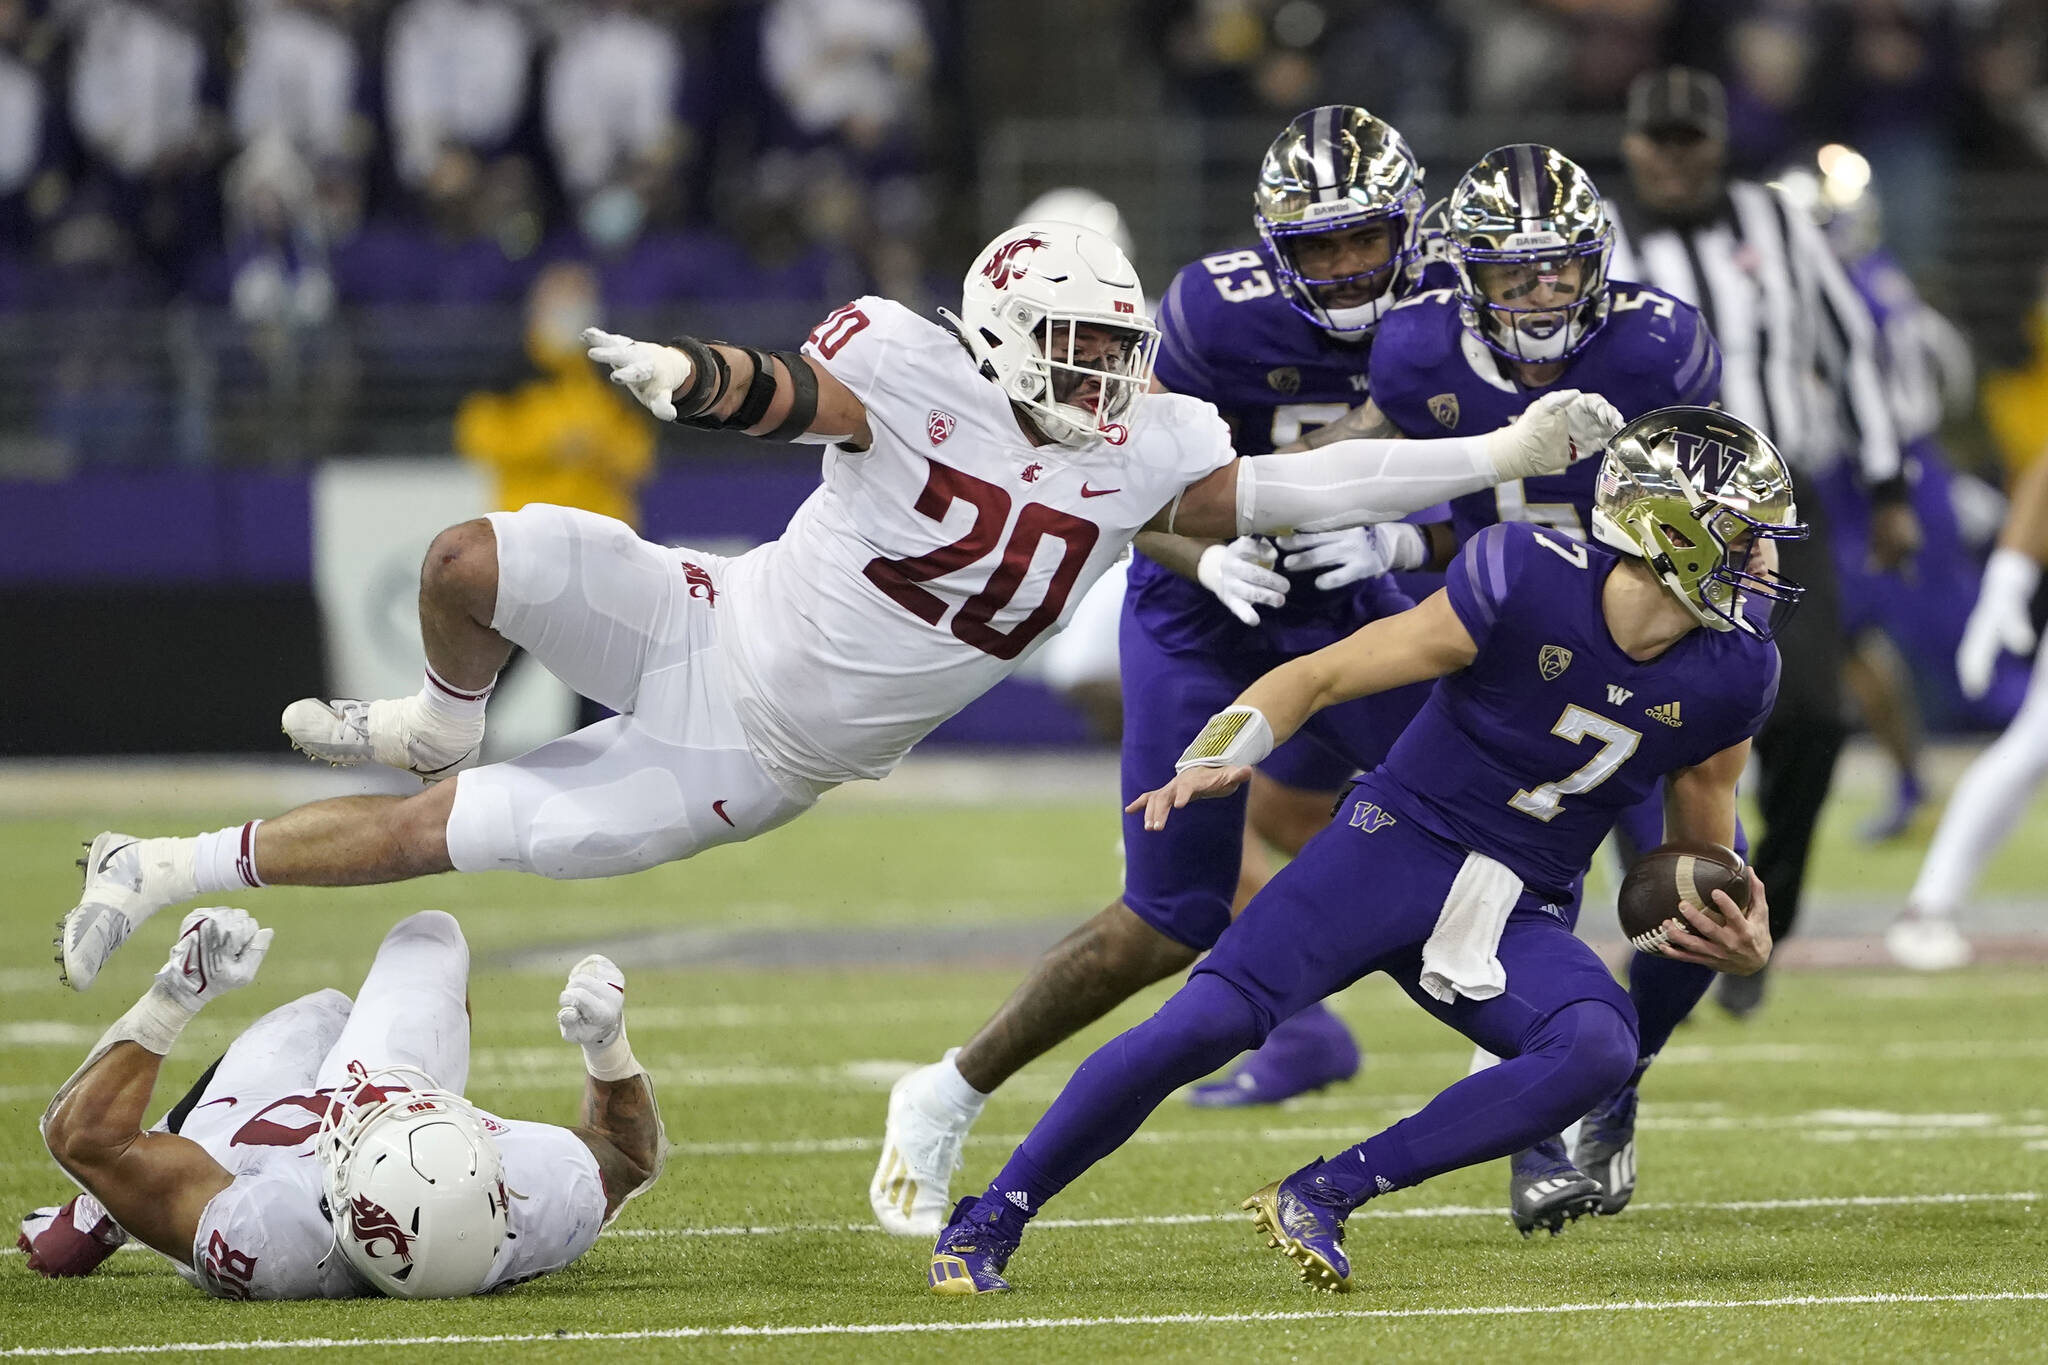 Washington State defensive end Quinn Roff (20) leaps in pursuit of Washington quarterback Sam Huard (7) during the second half of an NCAA college football game, Friday, Nov. 26, 2021, in Seattle. (AP Photo/Ted S. Warren)